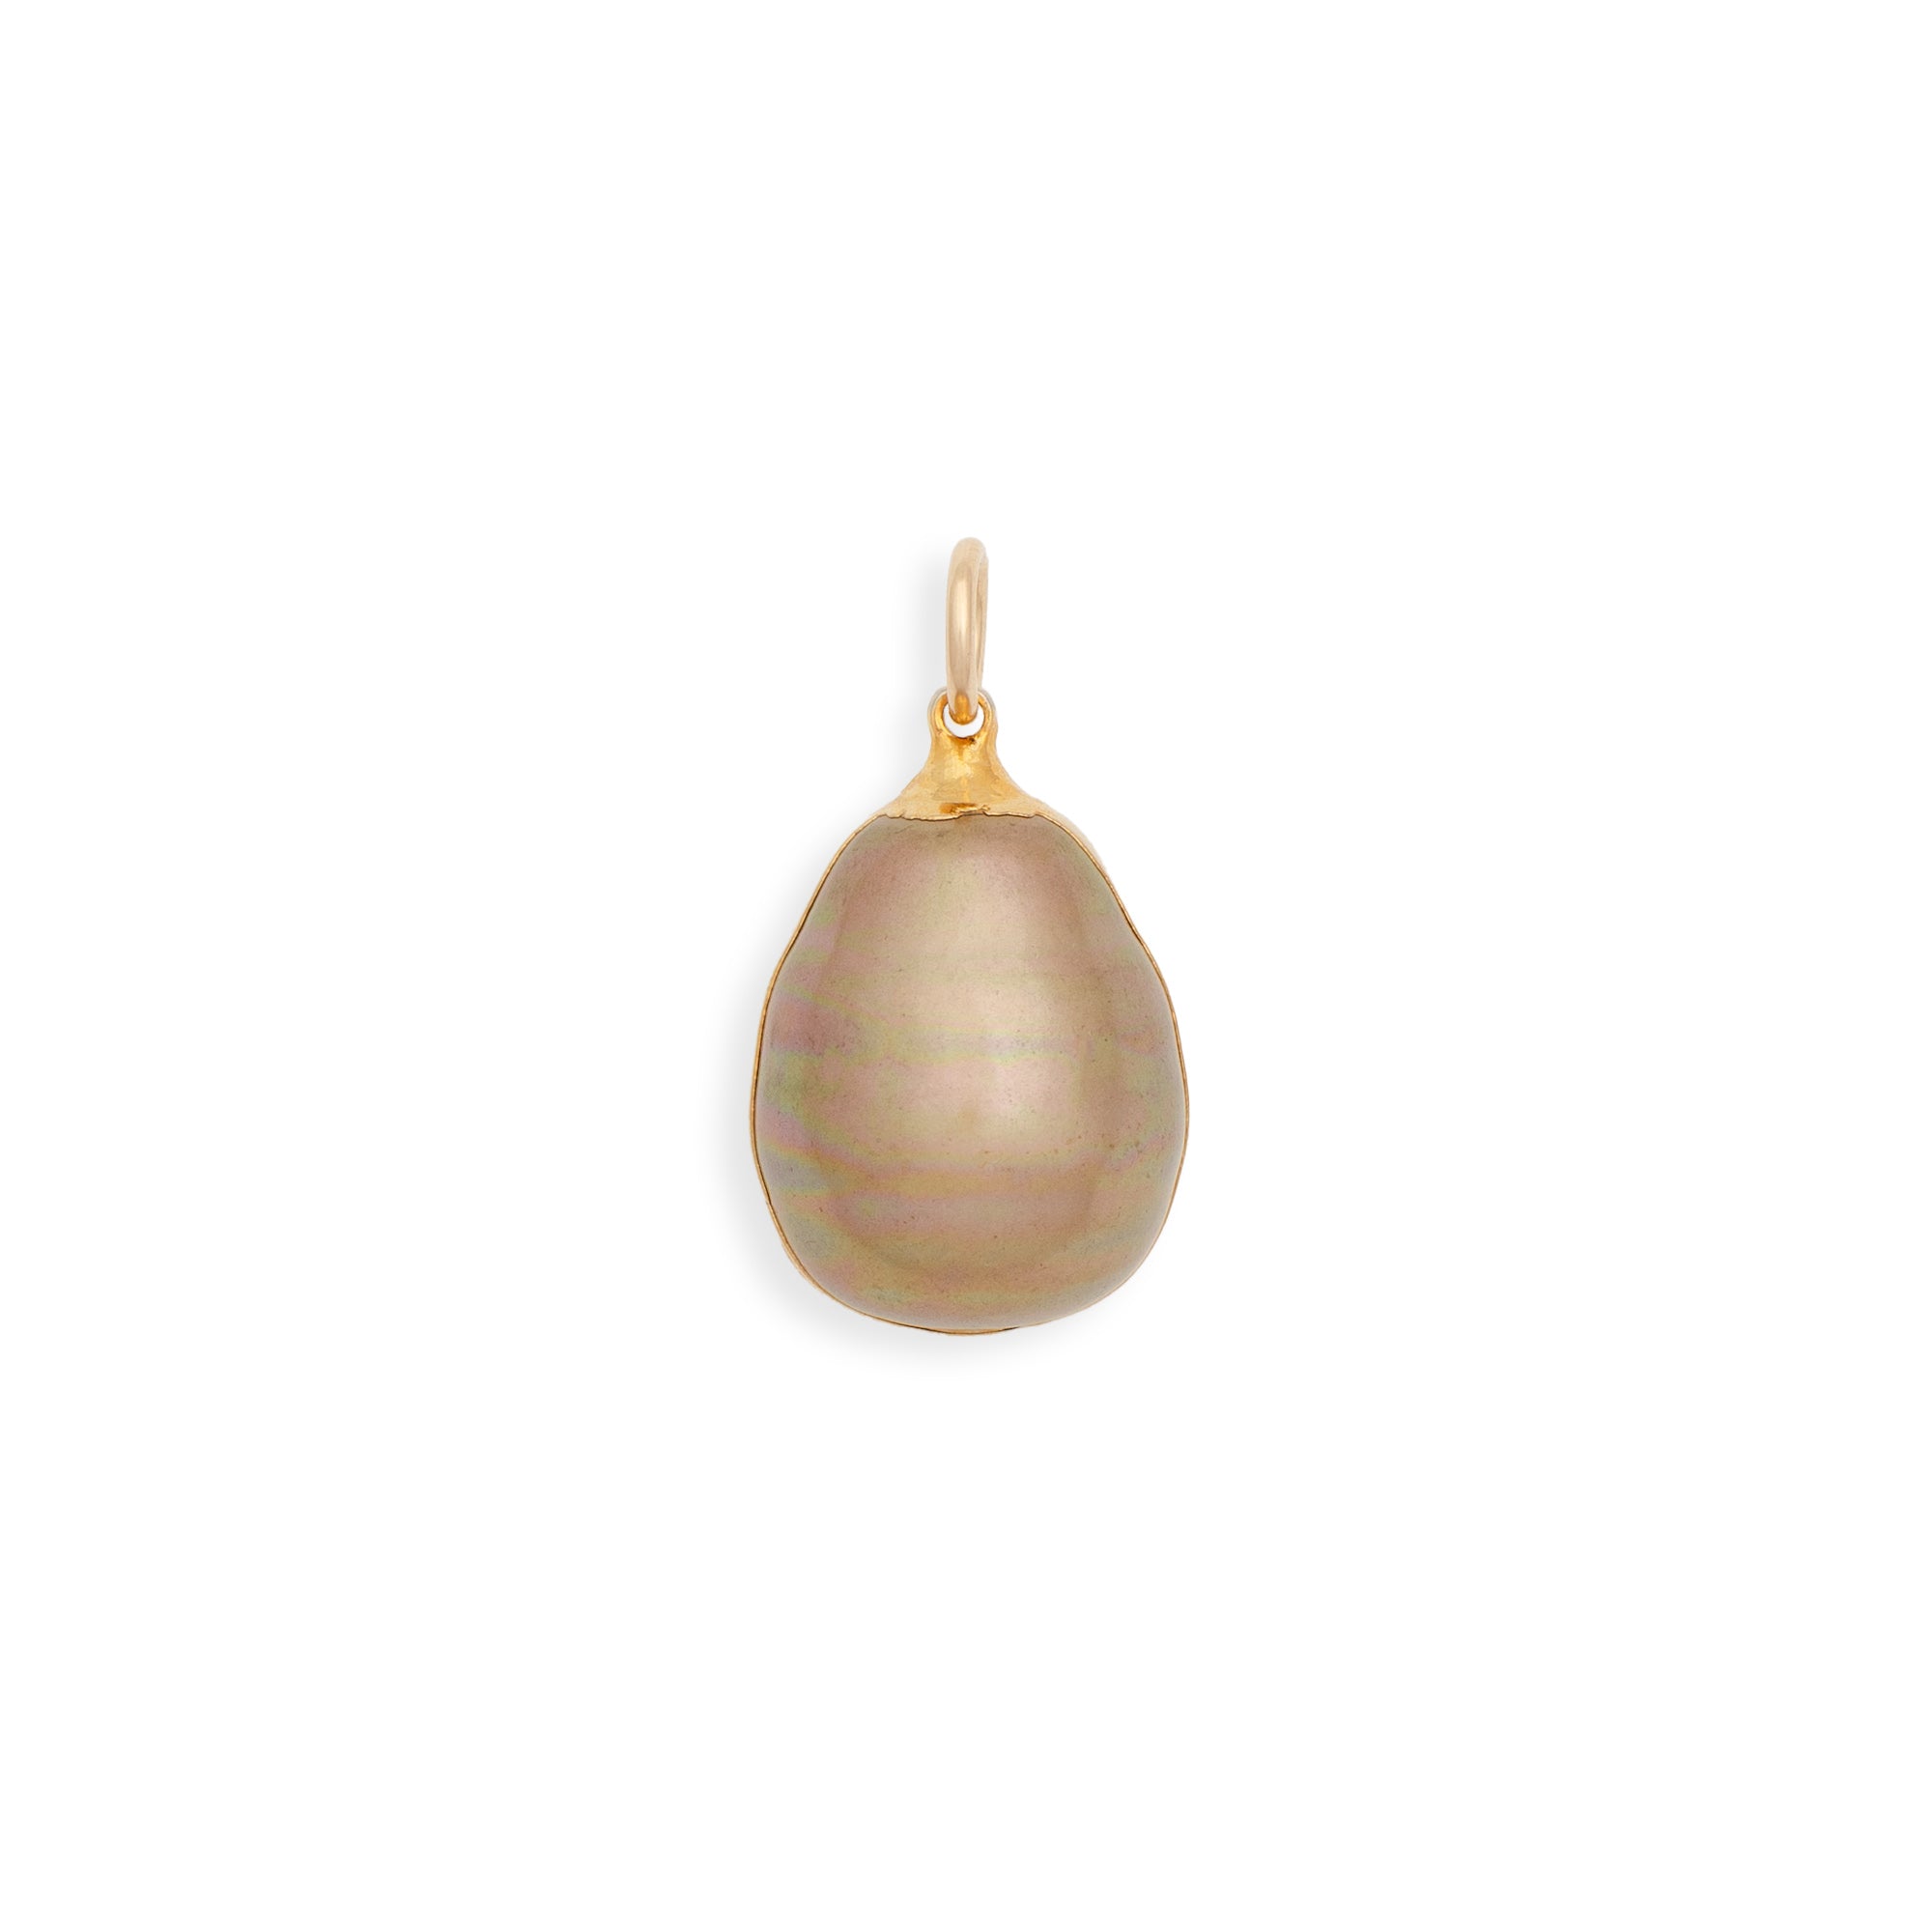 Baroque Pearl Charm - Caramel from Erin Fader Jewelry